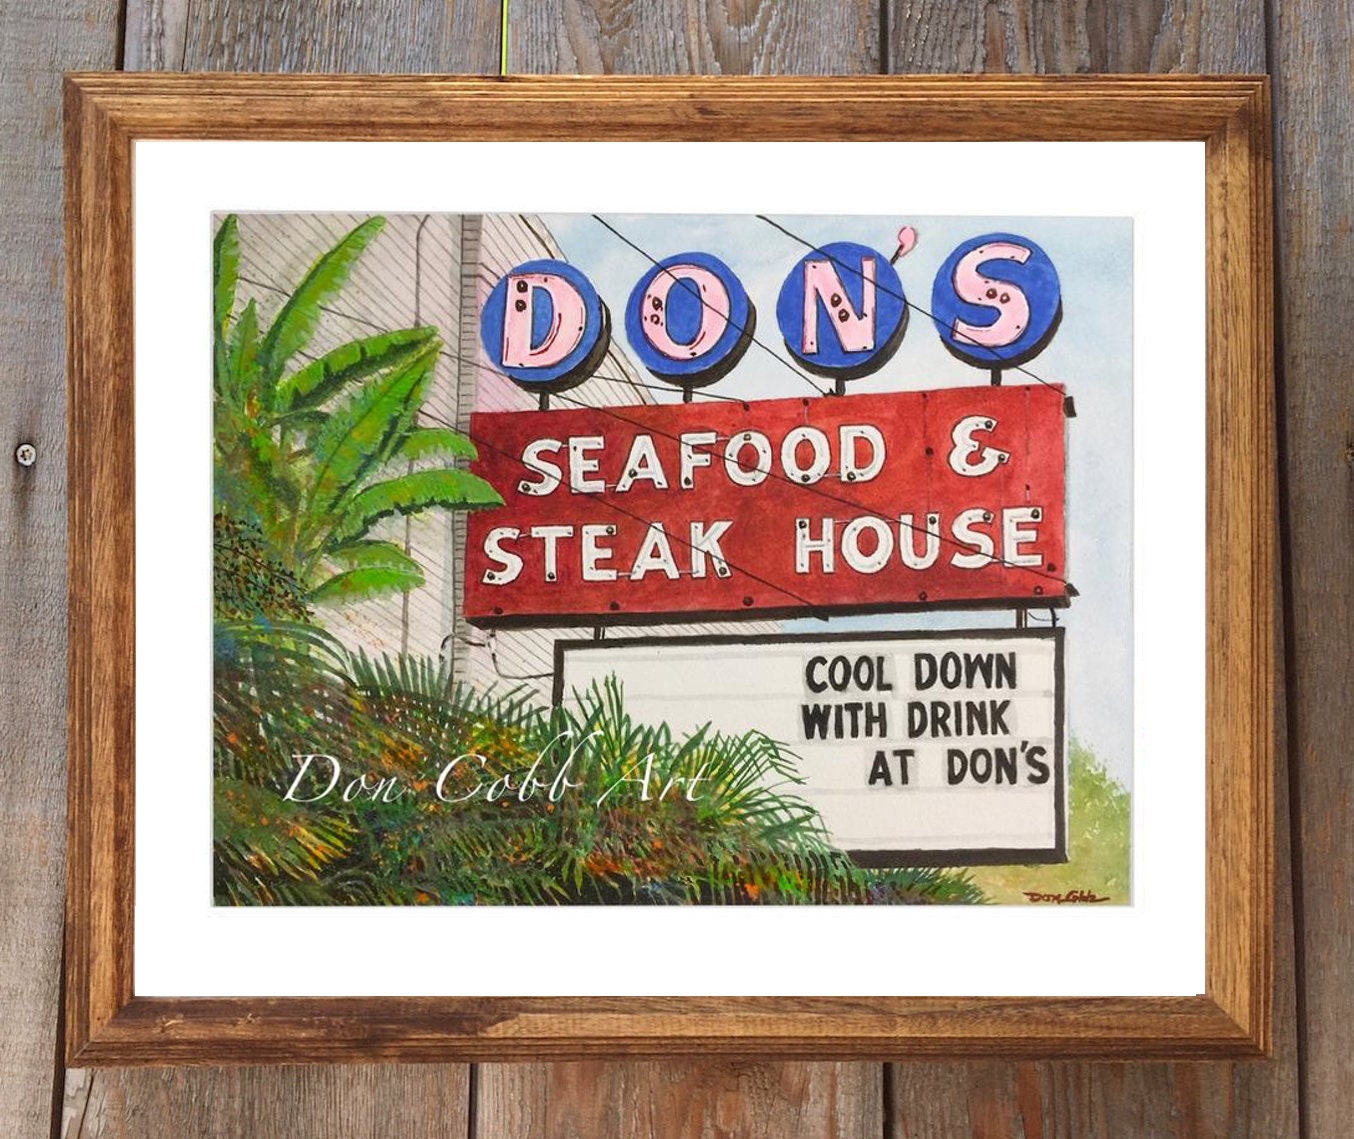 Don's Seafood Original Watercolor Painting Matted & Framed 22 X 18 | Not A Print Free Shipping